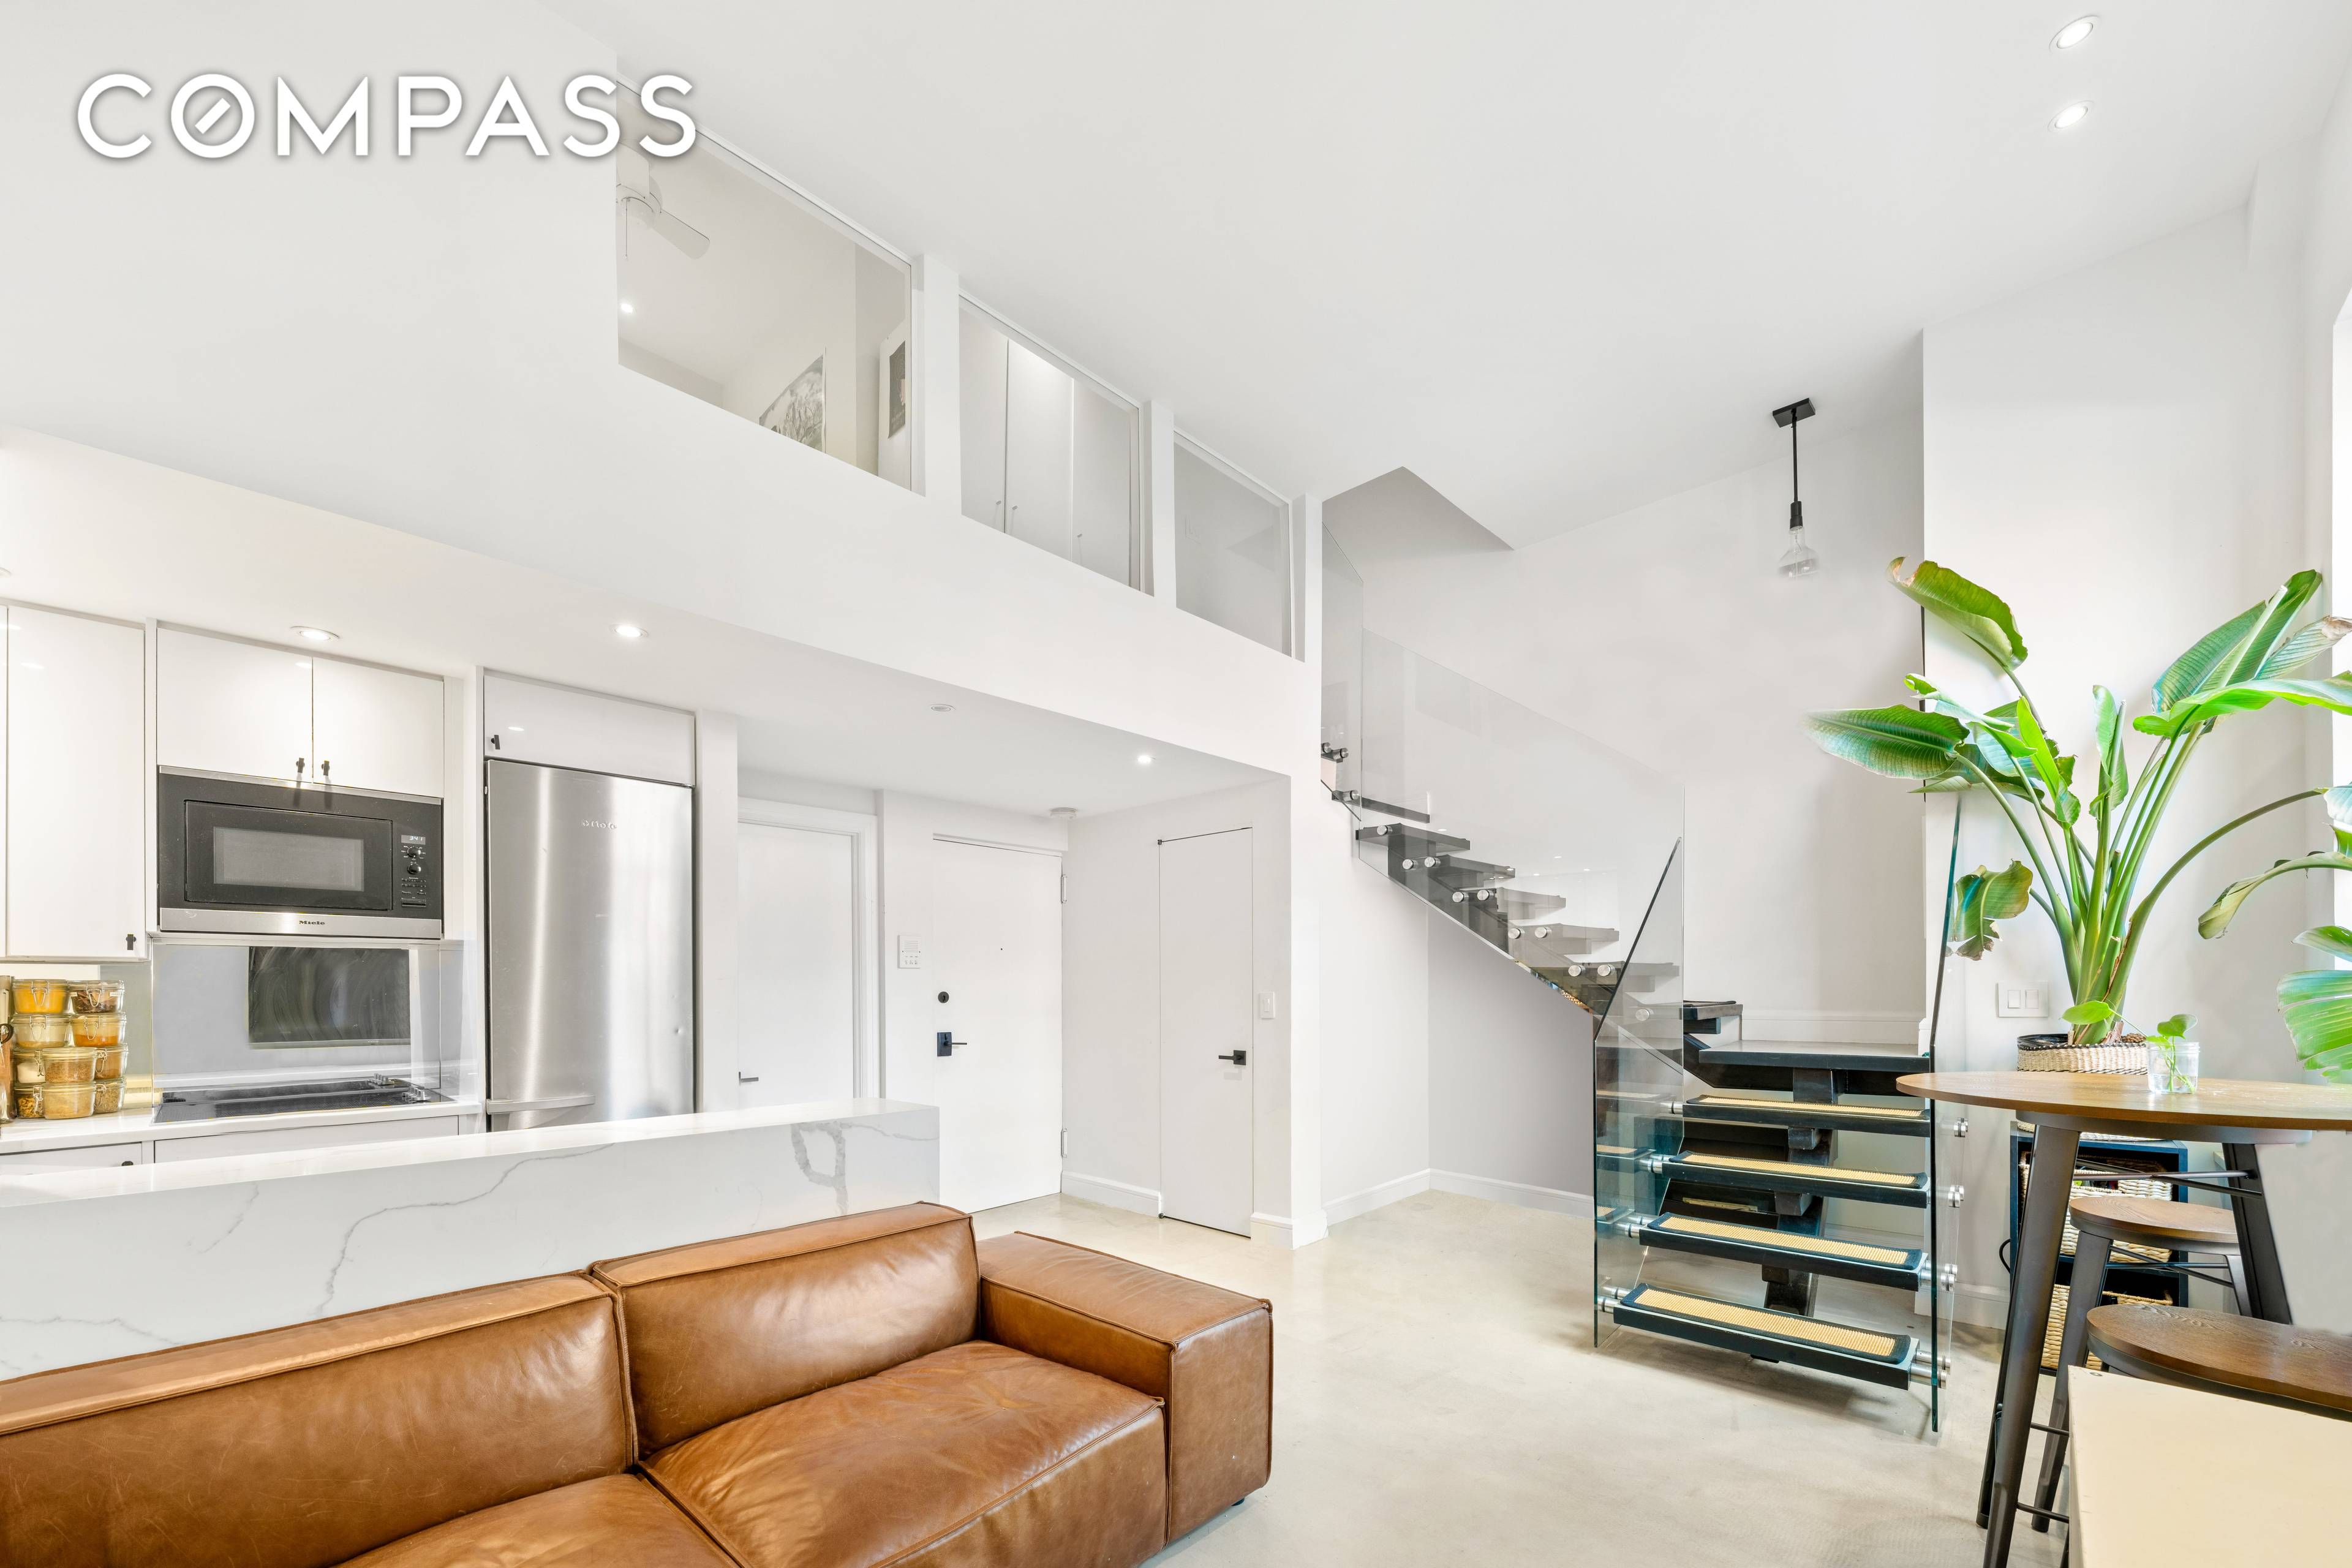 This here is an apartment that will surely make your friends jealous.